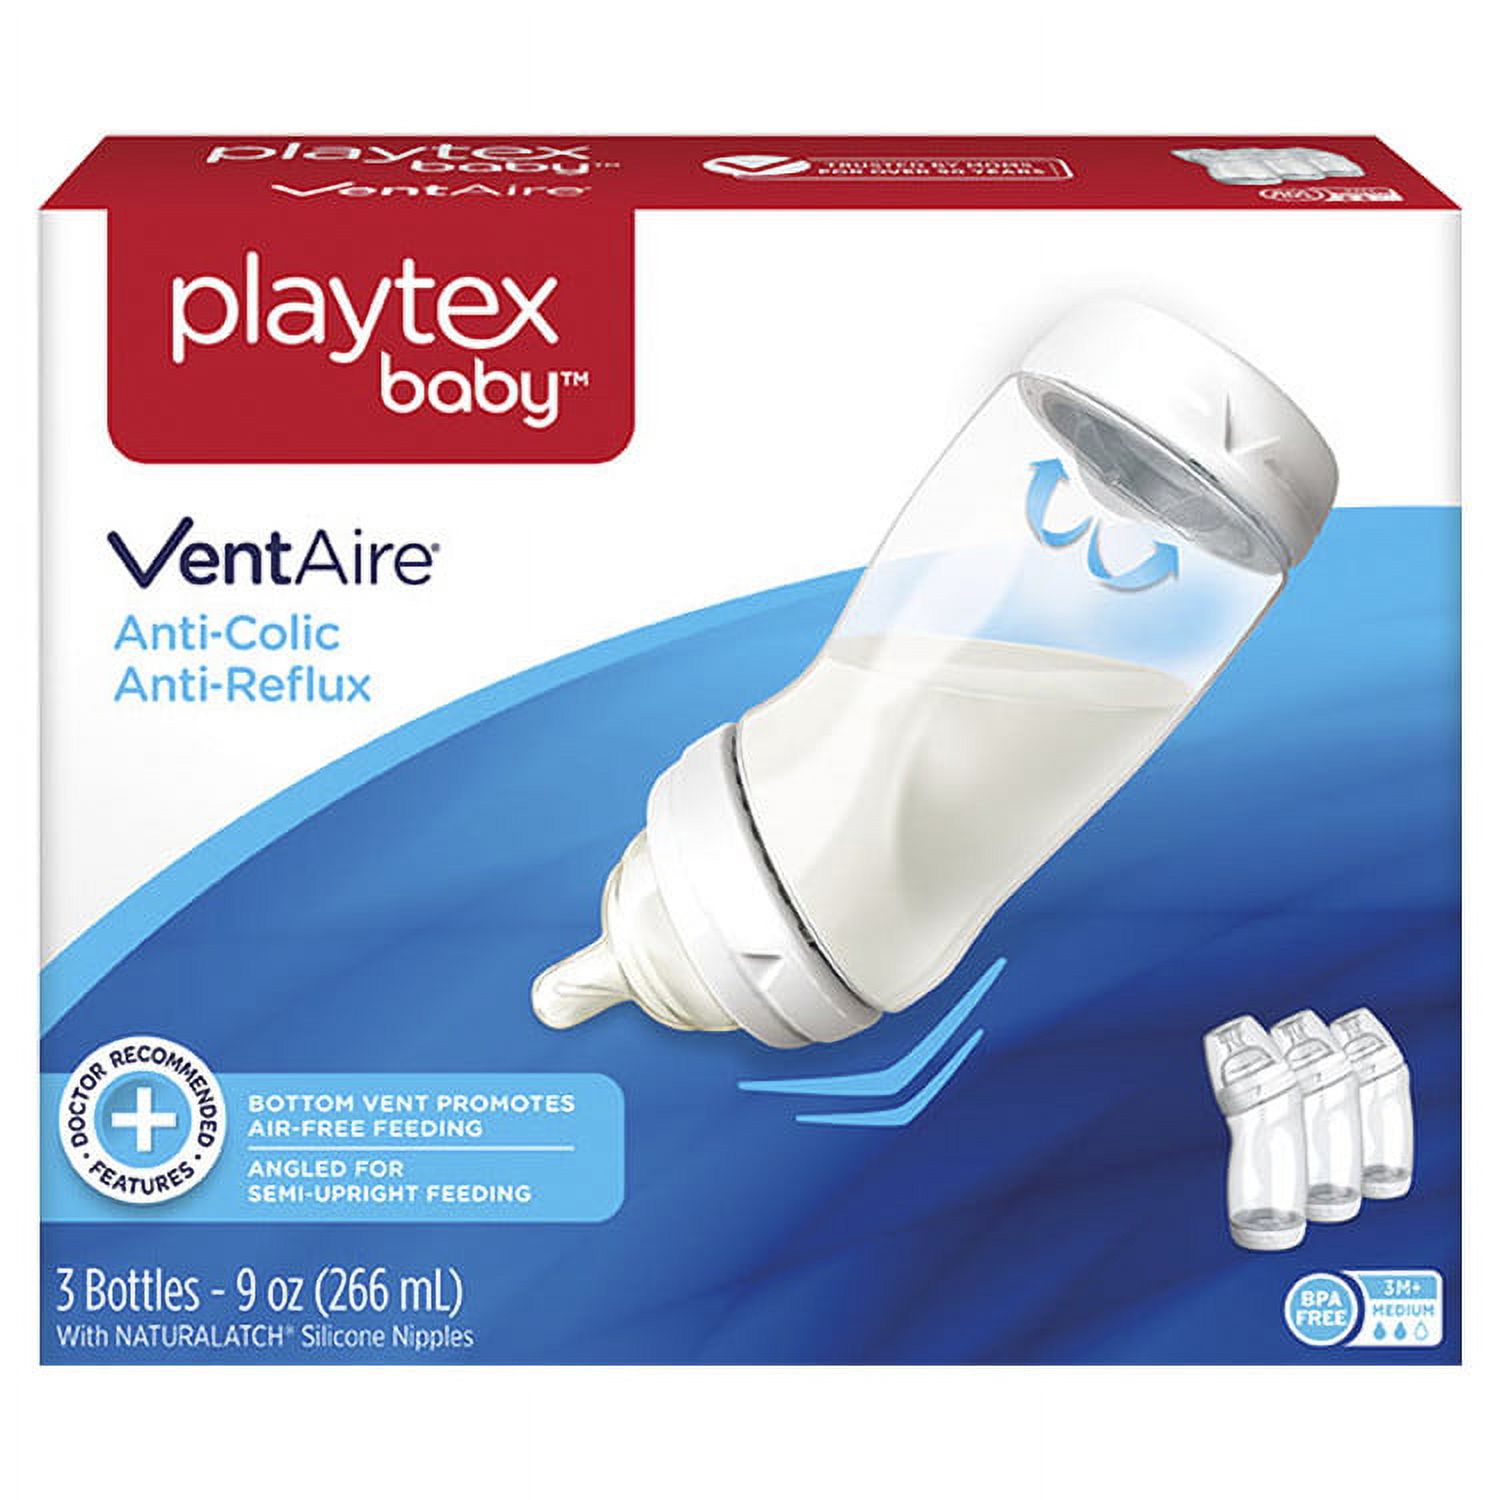 Playtex Ventaire Adv Wide Bottle 9oz 3pk - image 5 of 13